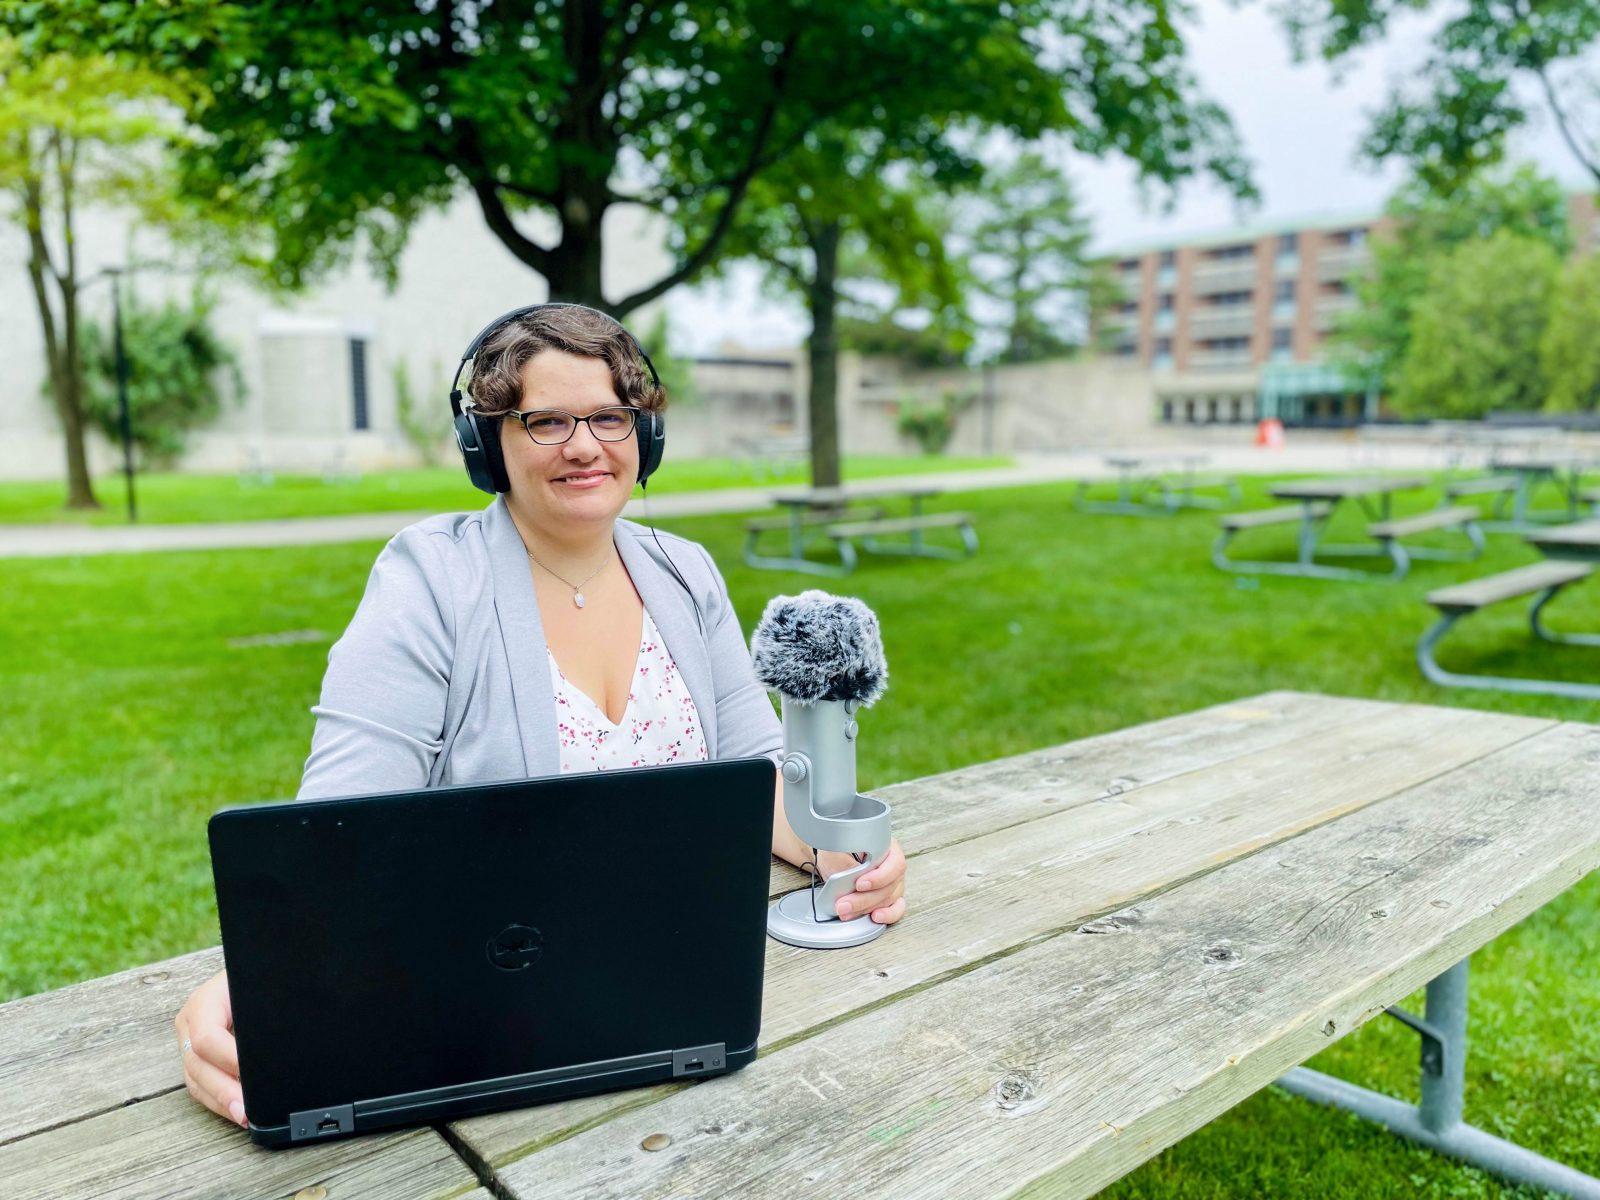 A woman with short hair and wearing glasses smiles warmly at the camera while sitting outdoors at Brock University in Jubilee Court. She is wearing a grey blazer and is sitting at a picnic bench, with a black laptop, a cell phone and recording equipment and microphone sitting in front of her. Green grass and empty picnic tables can be seen behind her.